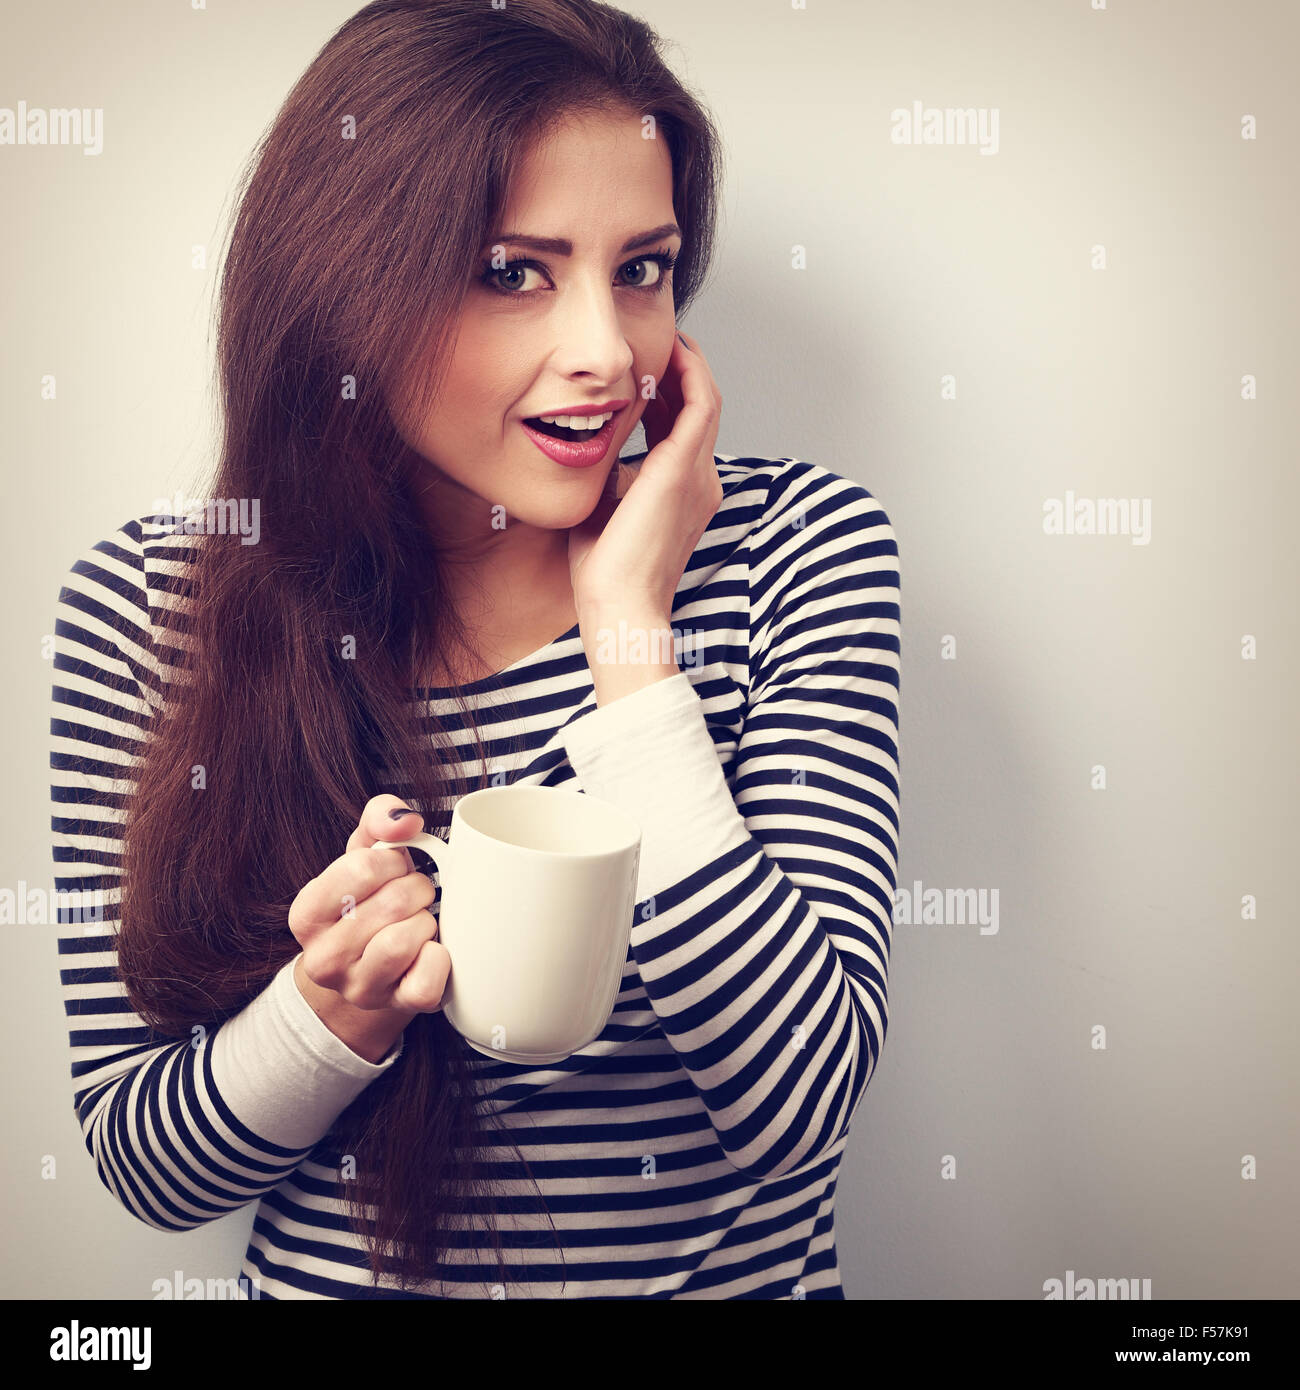 Fun surprising young woman with opened mouth holding cup of tea. VIntage closeup portrait Stock Photo